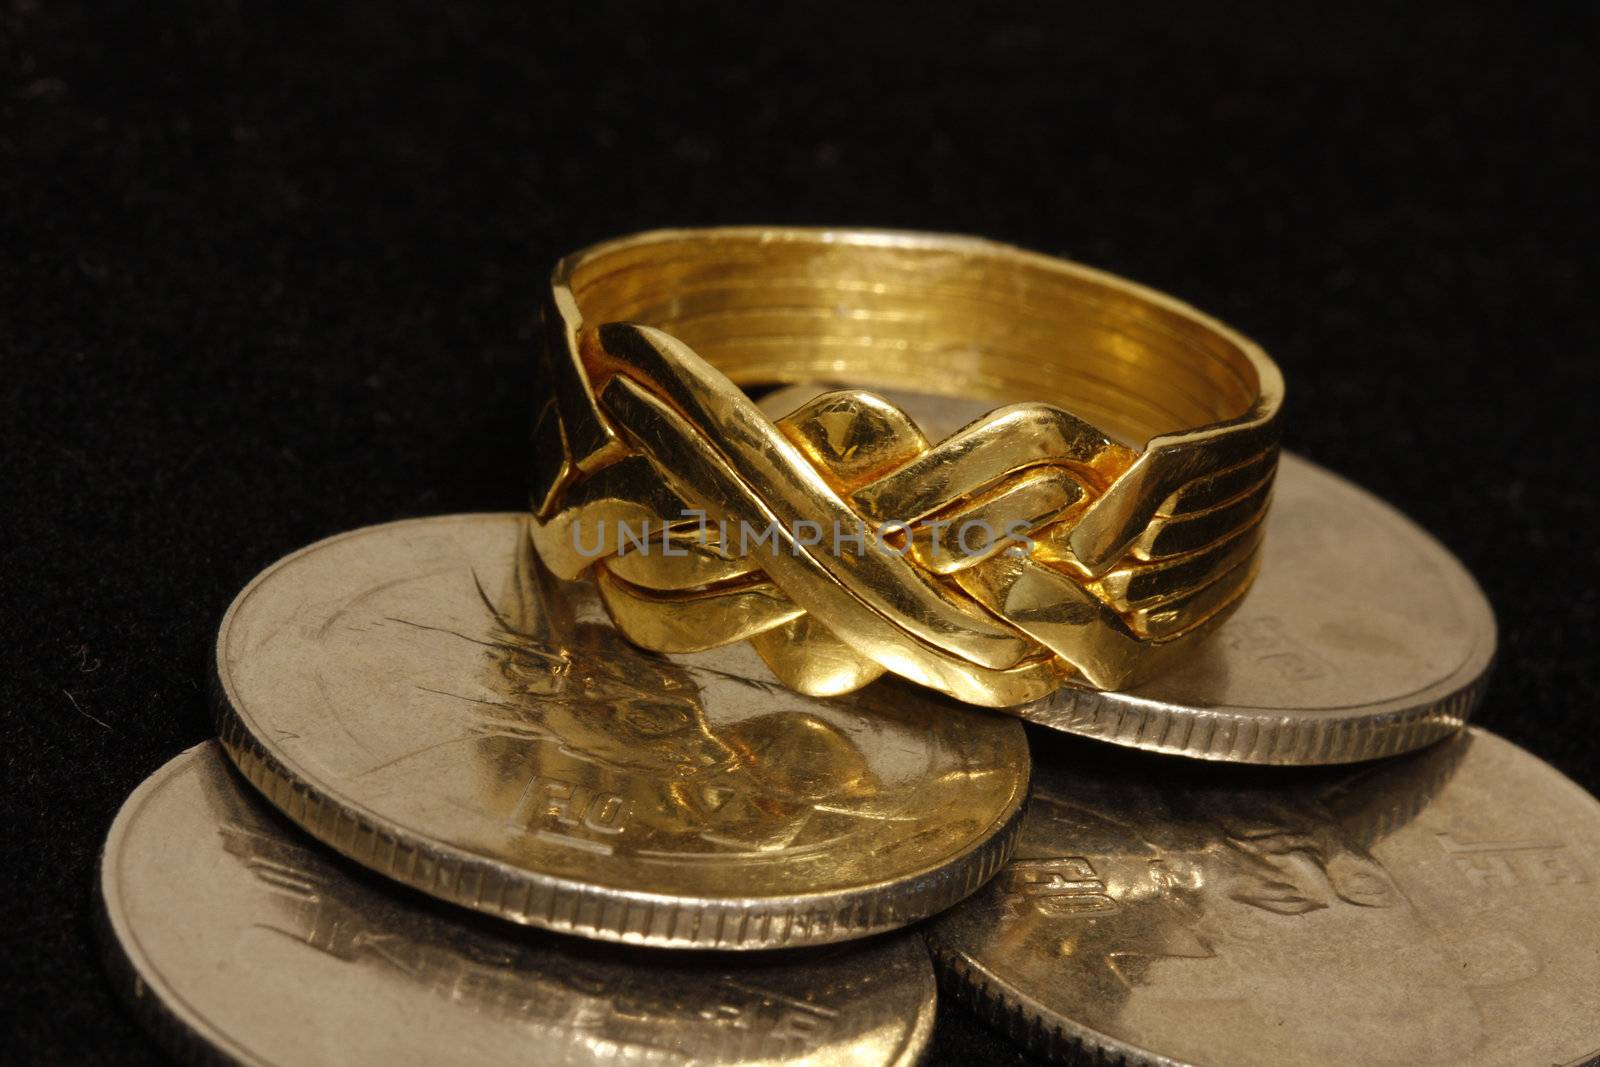 Gold Puzzle ring with coins in a black velvet background.